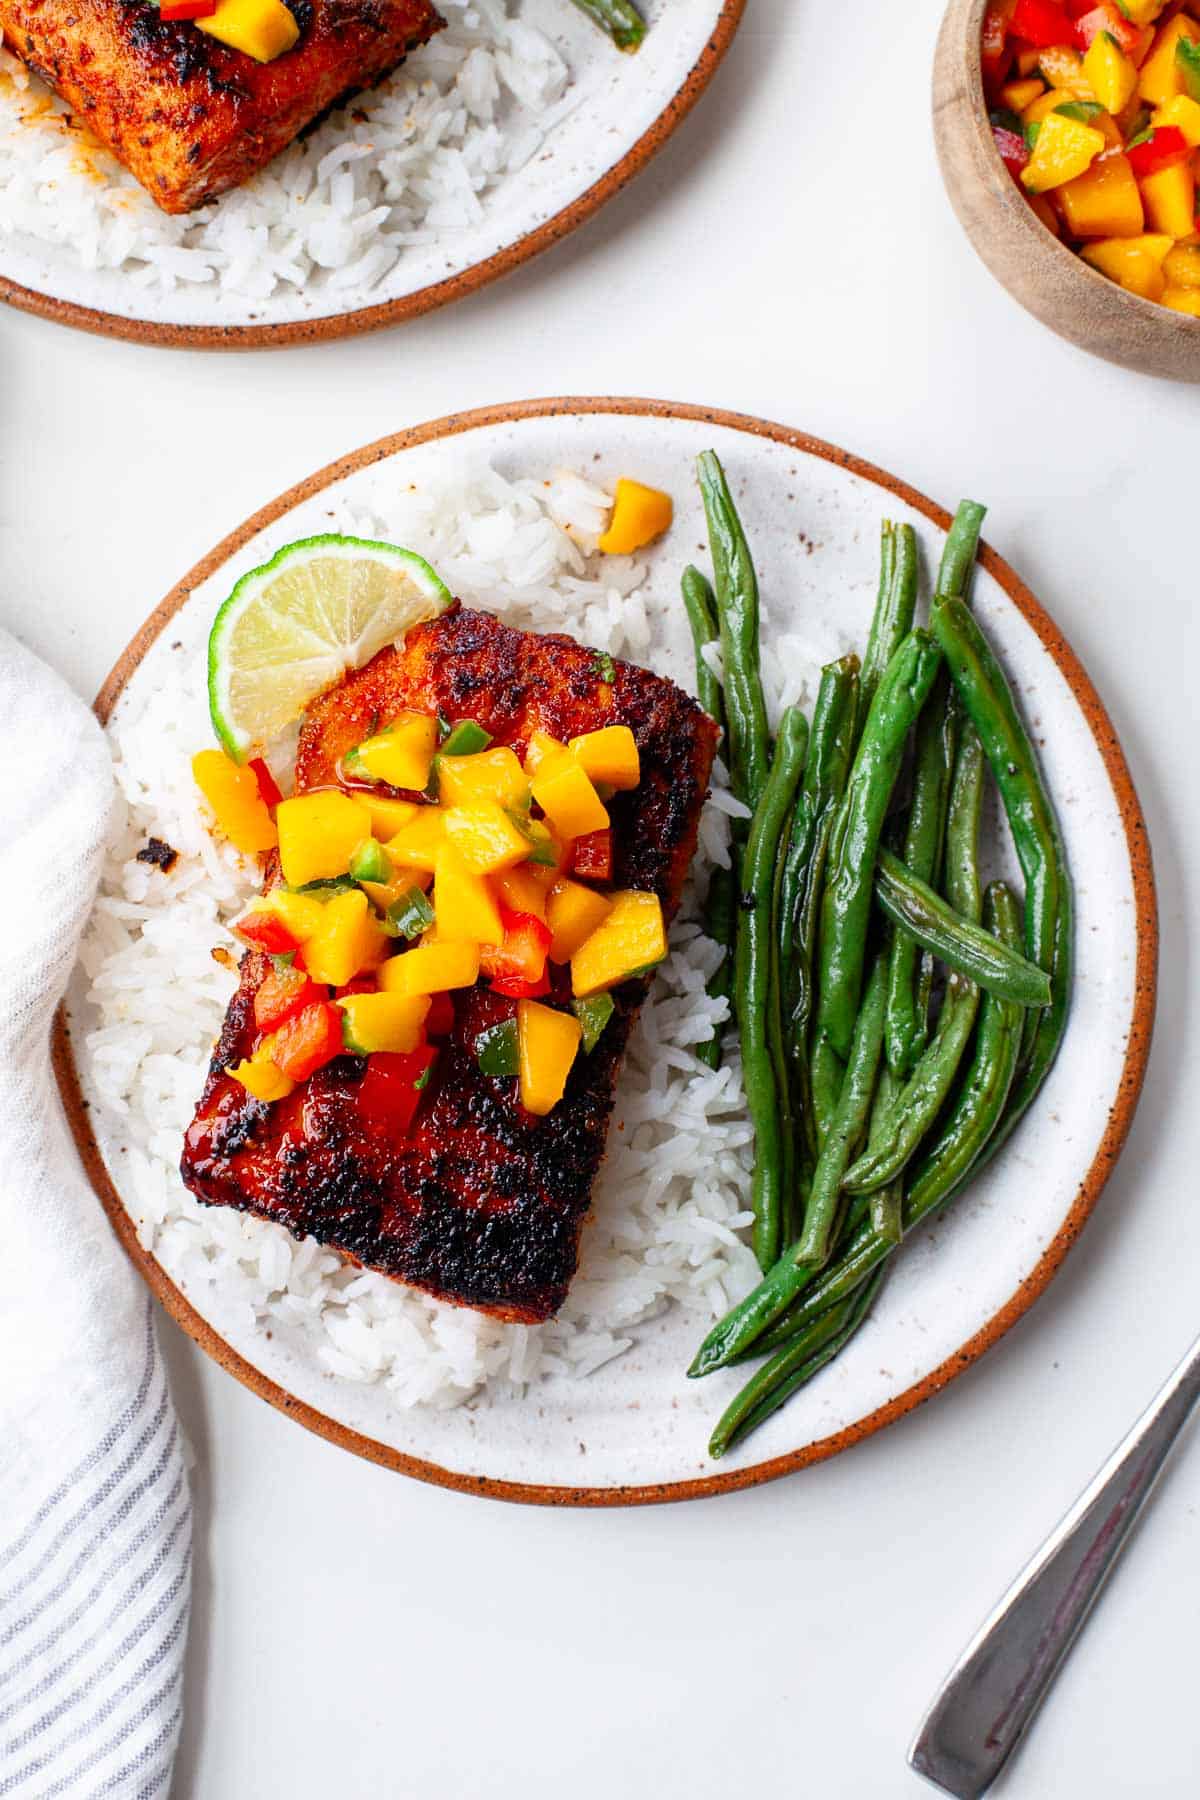 blackened mahi mahi atop a bed of white rice, garnished with fresh mango salsa and served with a side of green beans